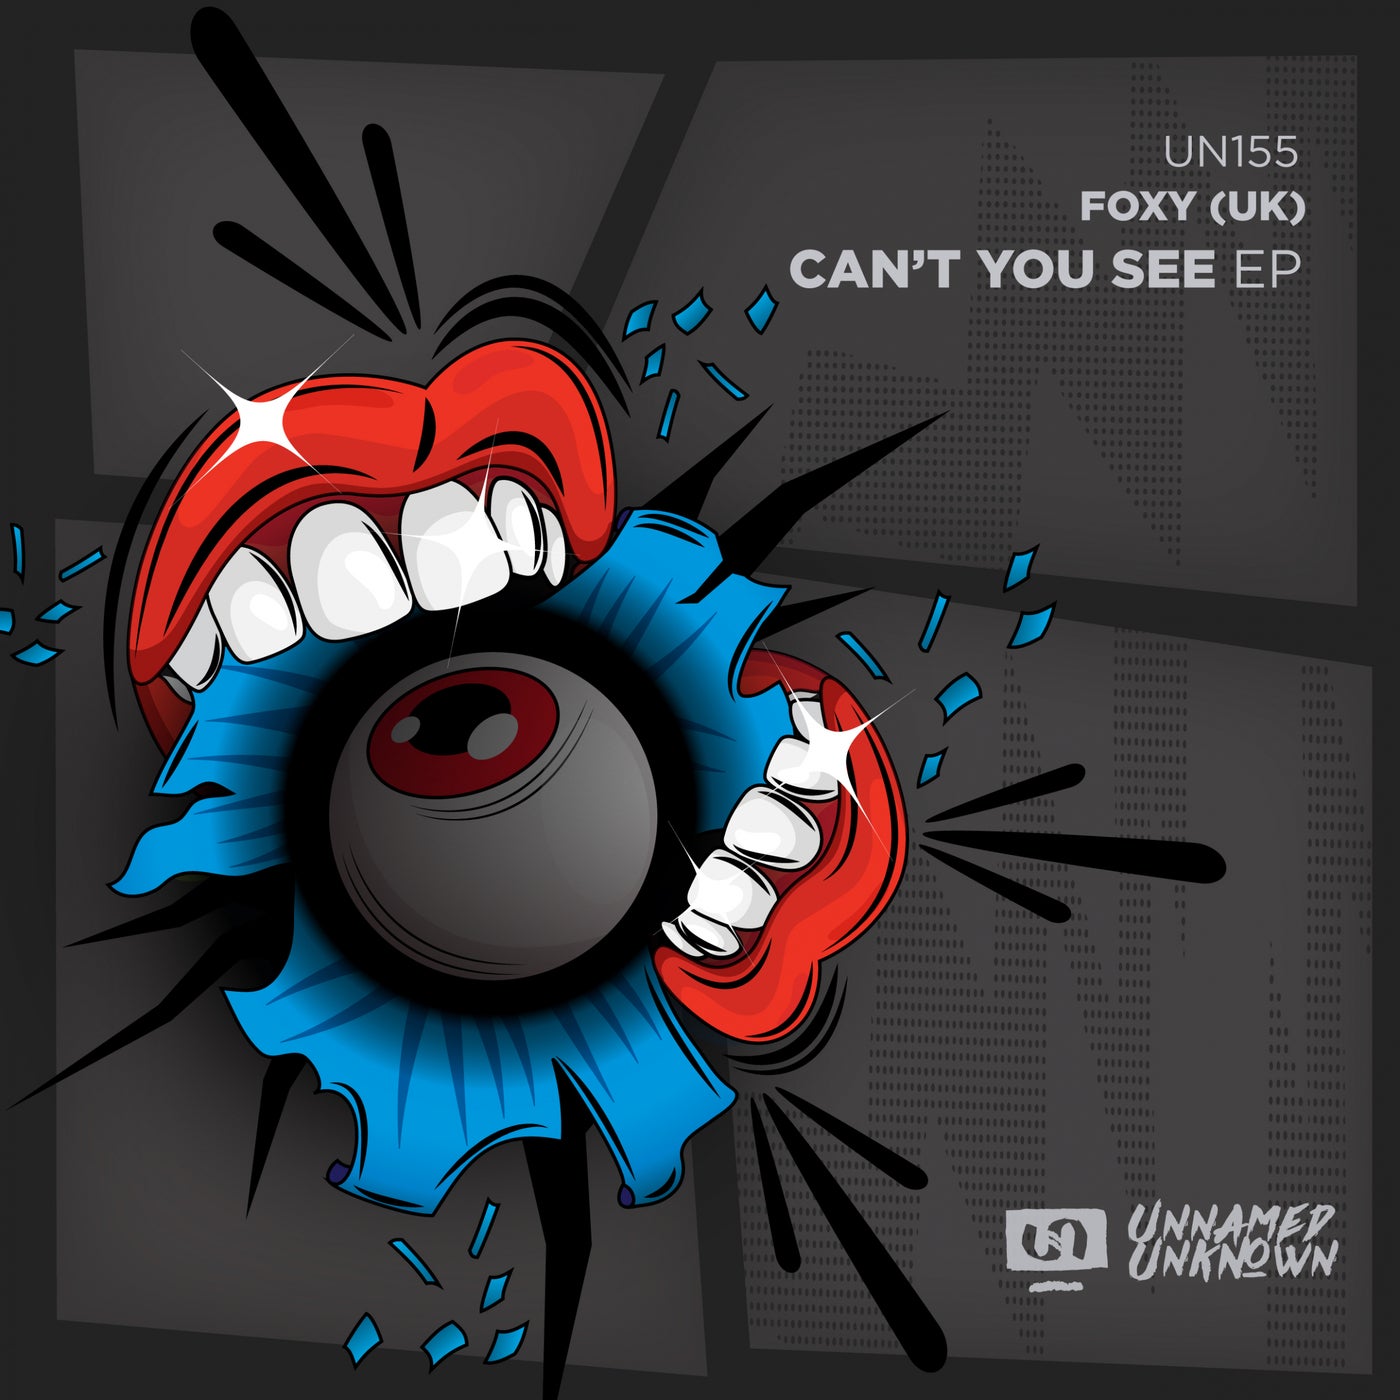 Foxy (UK) – Can’t You See [UN155]